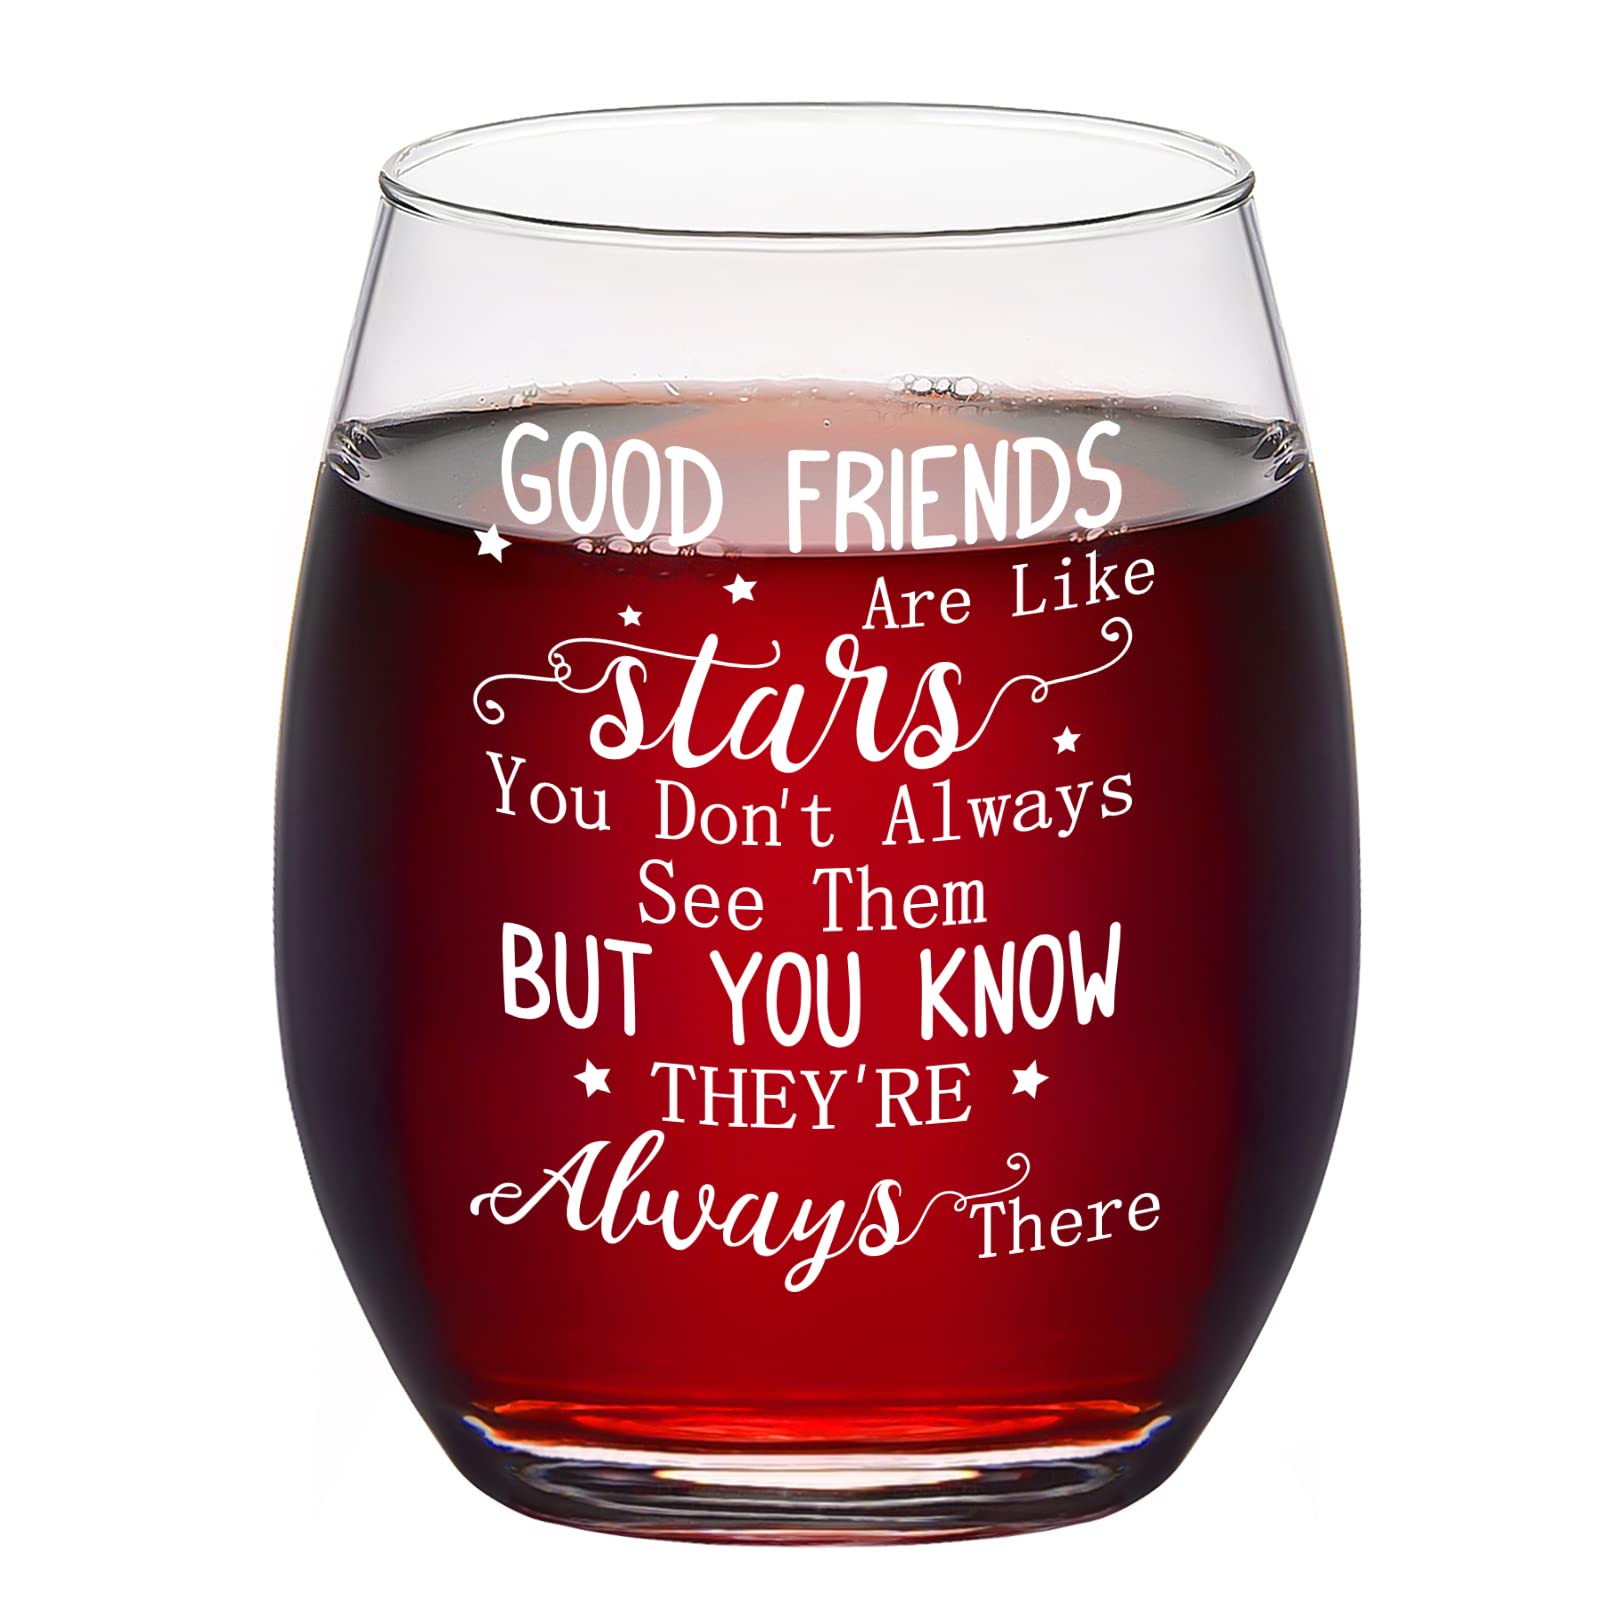 Friend Gift - Friend Stemless Wine Glass 15Oz, Good Friends Are Like Stars Wine Glass for Women, Sisters, Girls, Best Friends, Soul Sister, Gift Idea for Christmas, Birthday, Galentine's Day